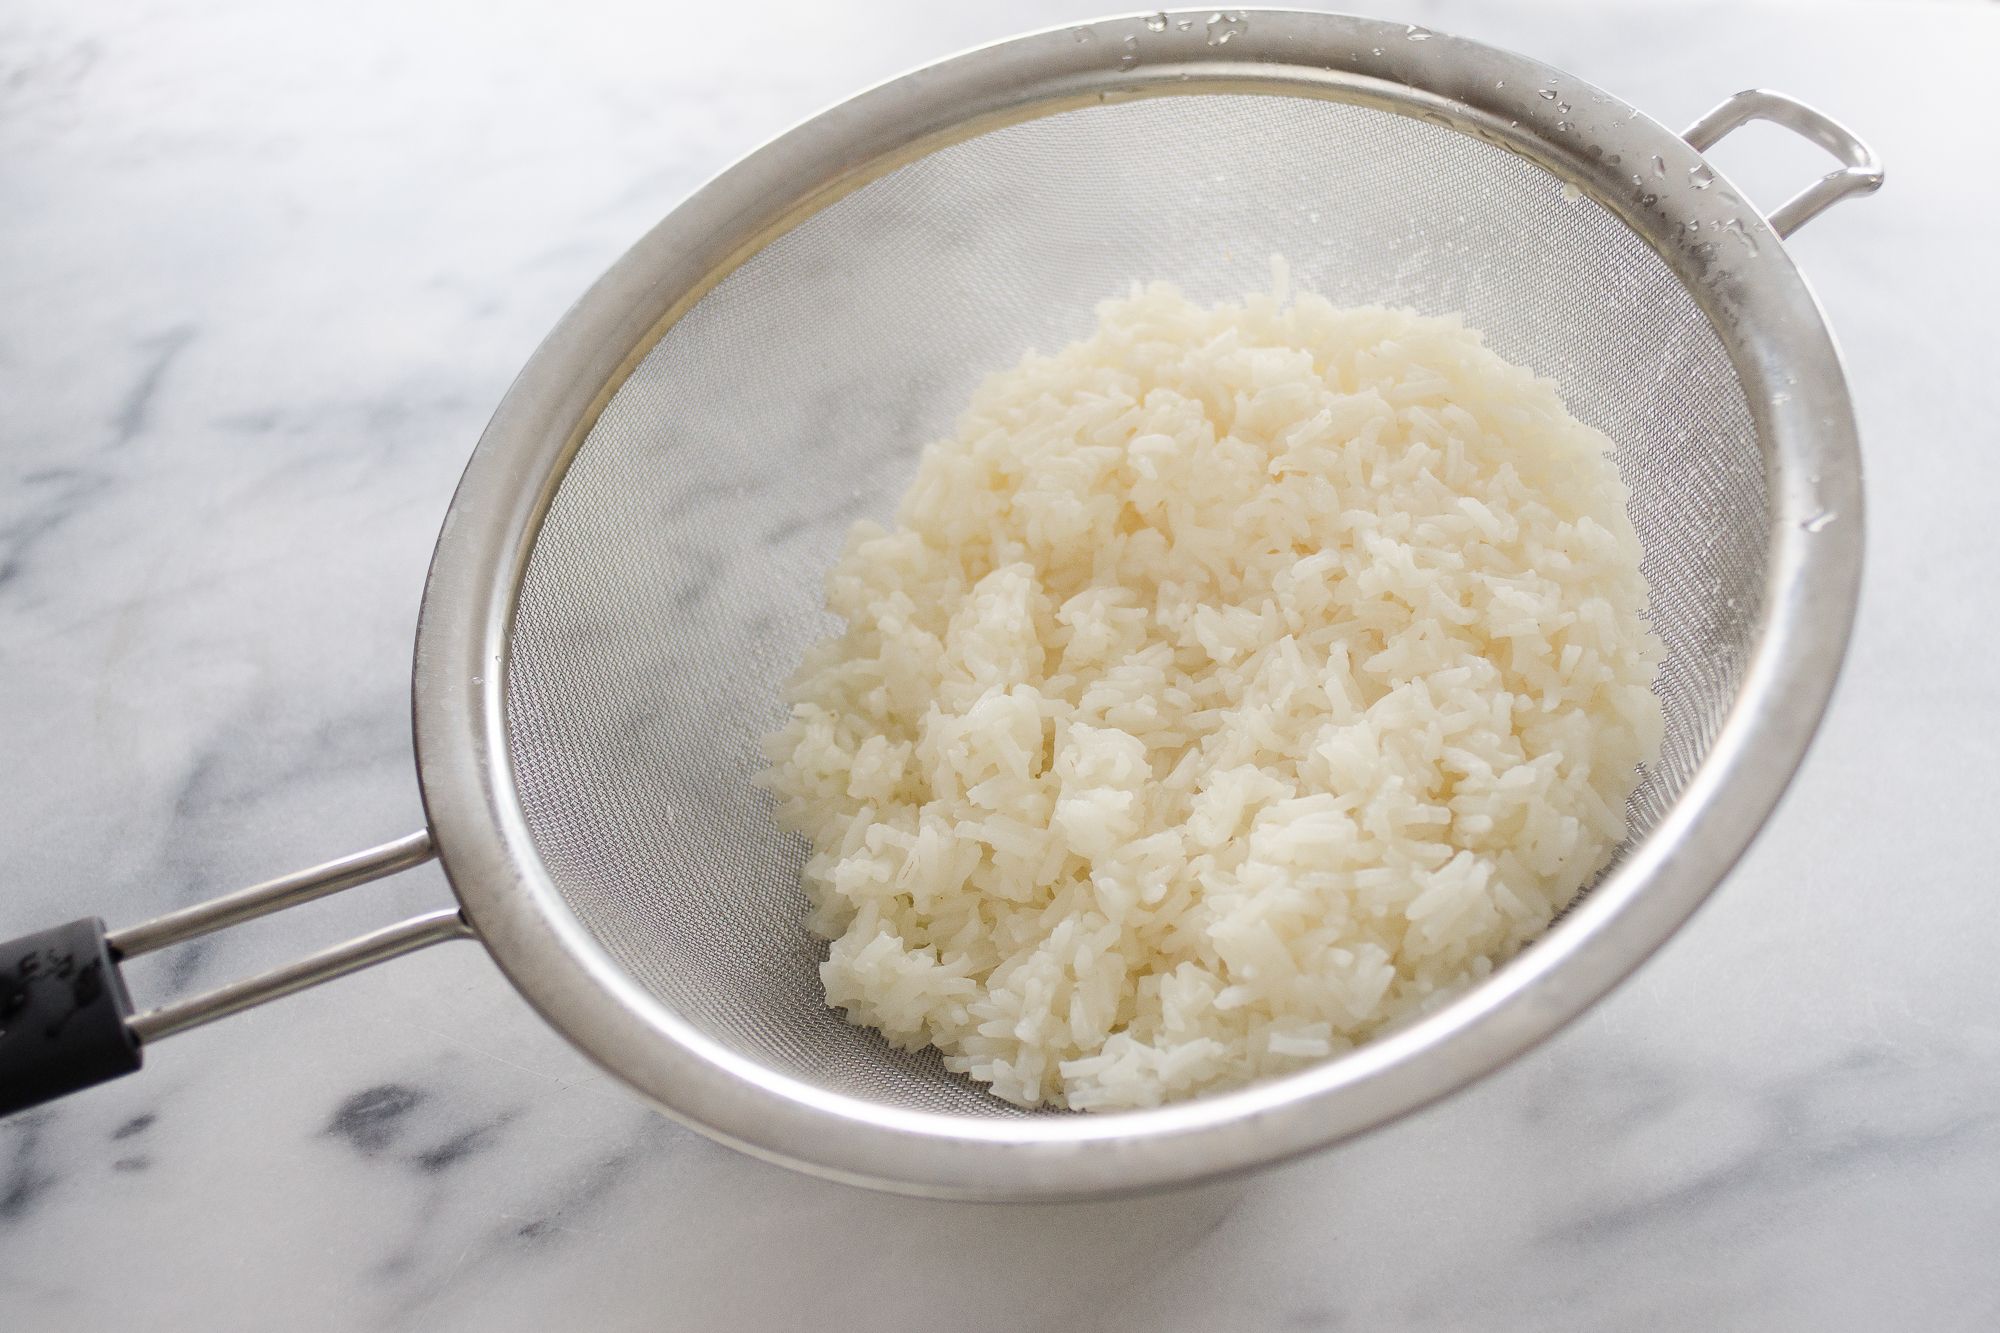 https://hips.hearstapps.com/thepioneerwoman/wp-content/uploads/2017/05/how-to-make-rice-without-a-rice-cooker-10.jpg